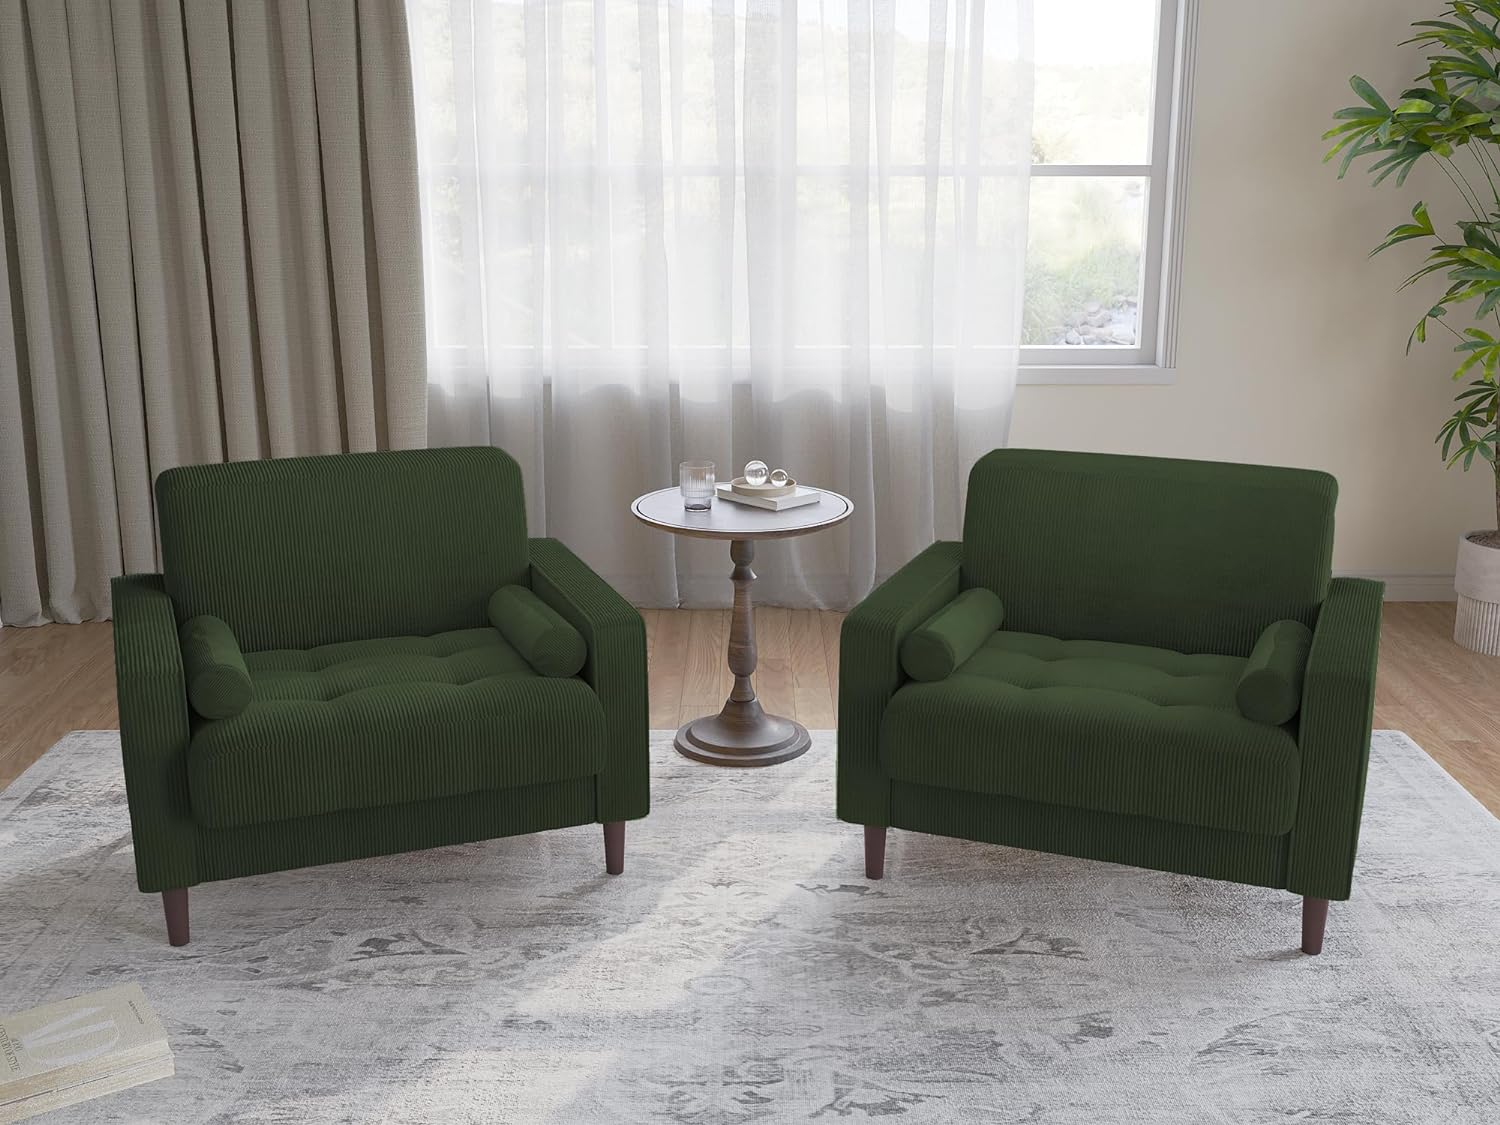 UIXE Corduroy Accent Chairs Set of 2, Modern Upholstered Living Room Arm Chair Comfy Bedroom Reading Armchair with Bolster Pillows, Mid-Century Track Armrest Tufted Single Sofa Seat (Green)